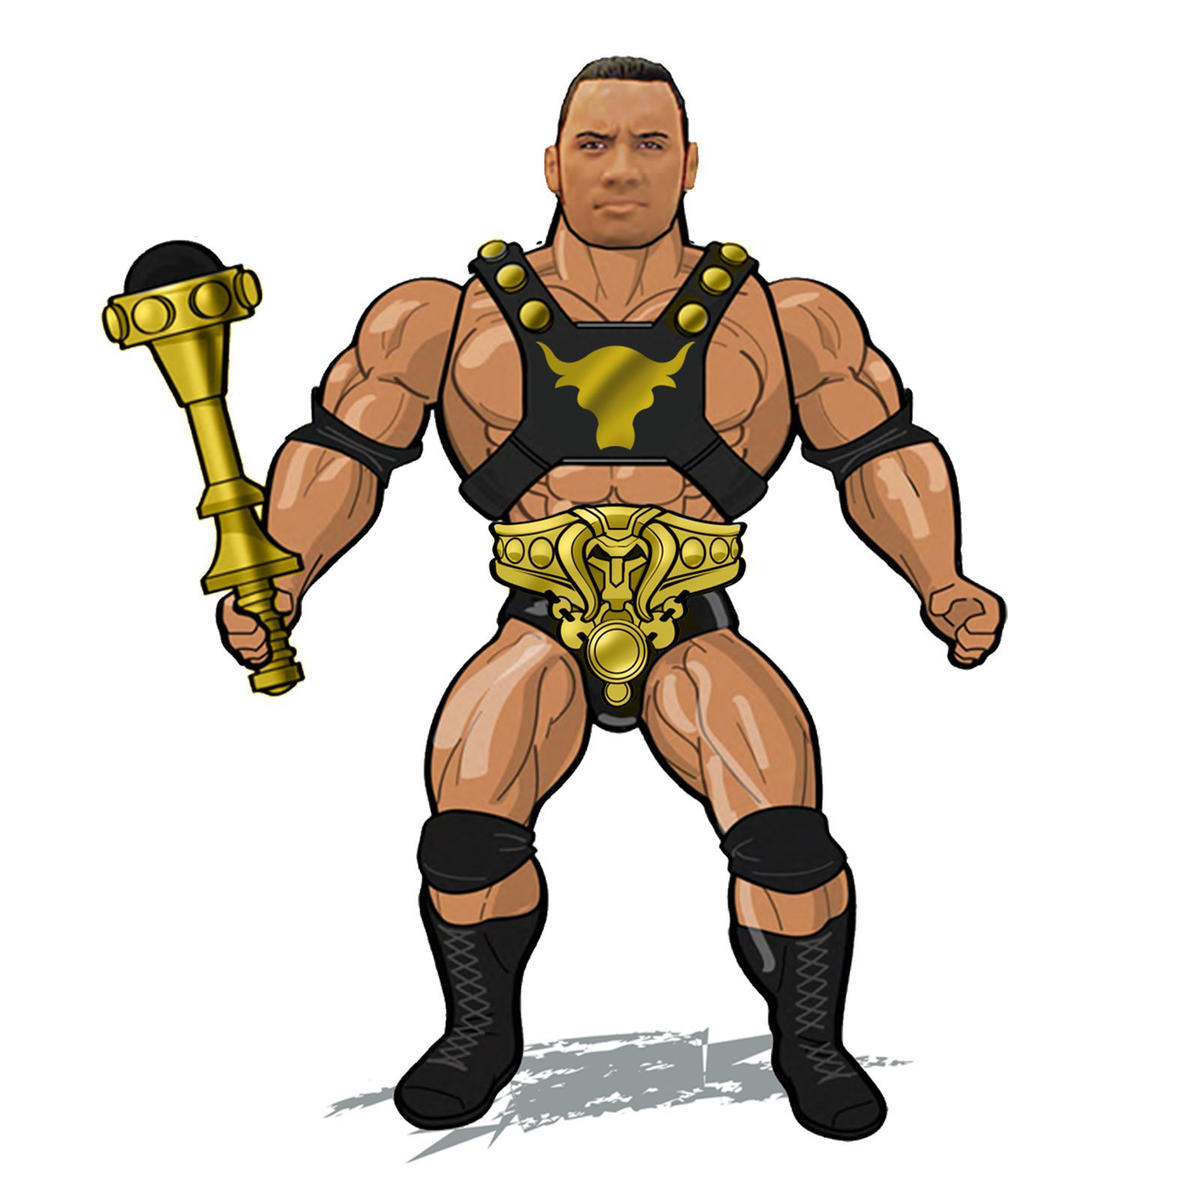 2020 Mattel Masters of the WWE Universe Series 3 The Rock [Exclusive]